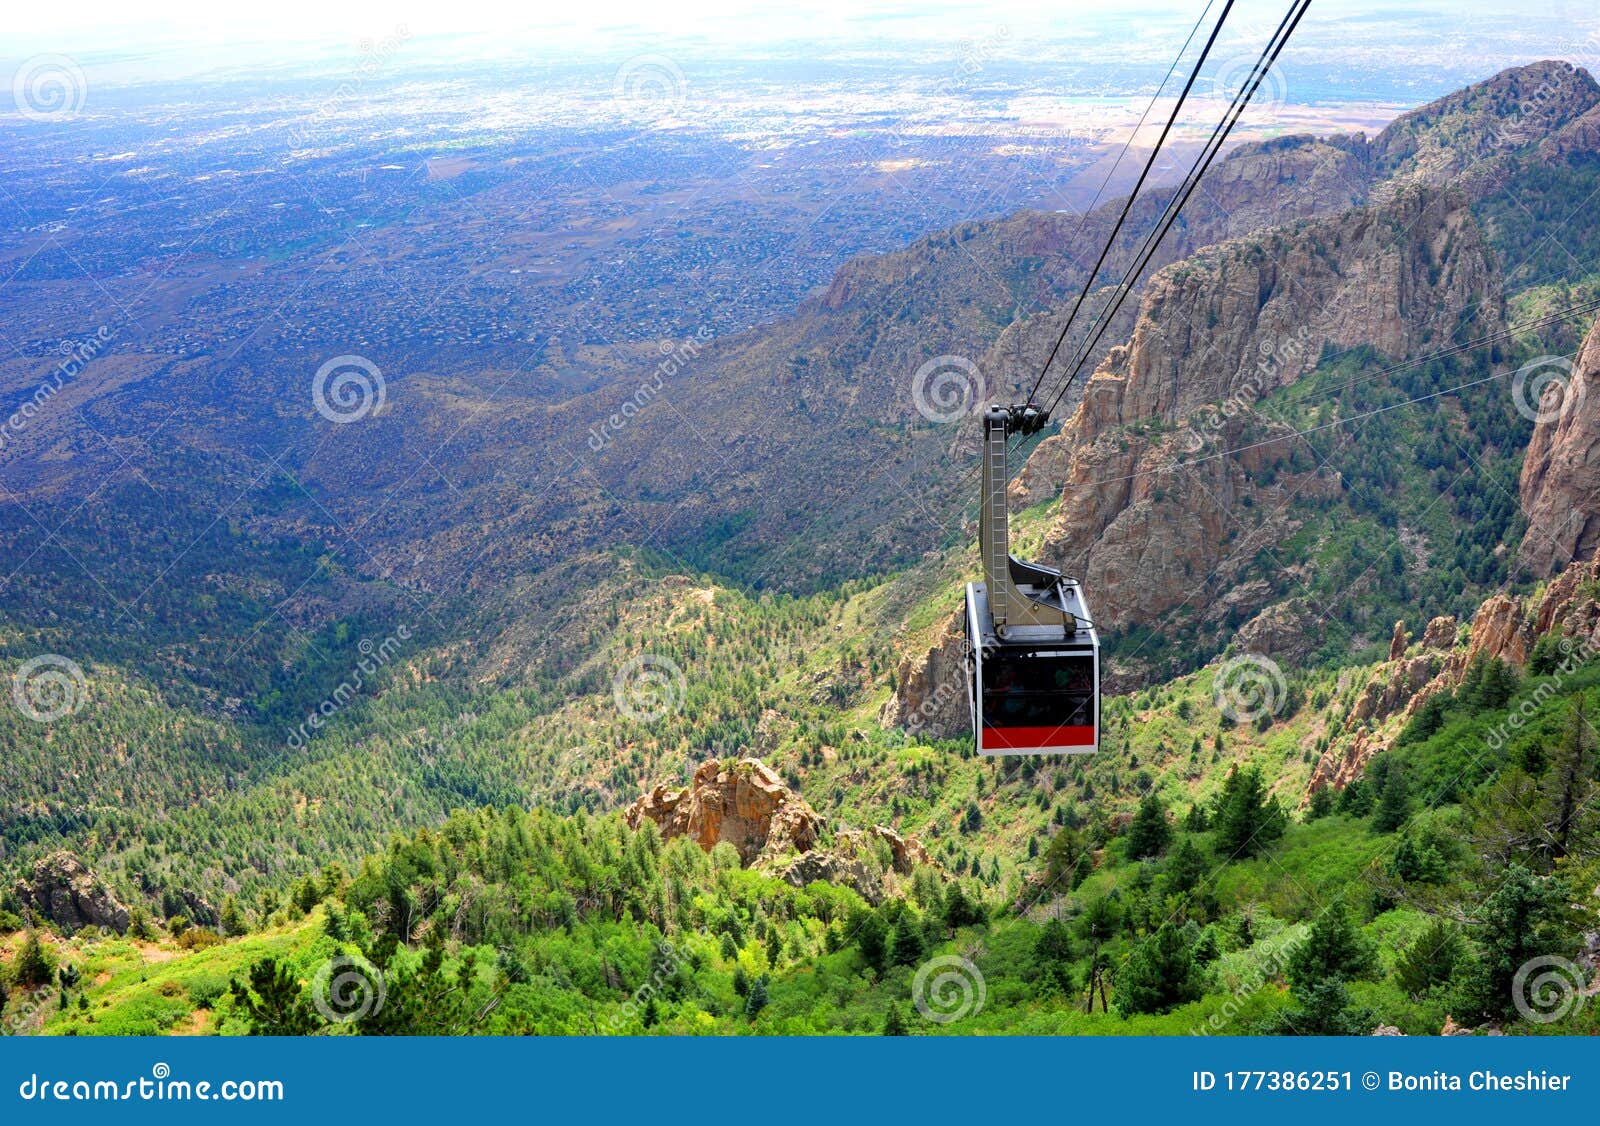 Crest Tram Ride In Sandia Mountains Royalty-Free Stock Photography ...